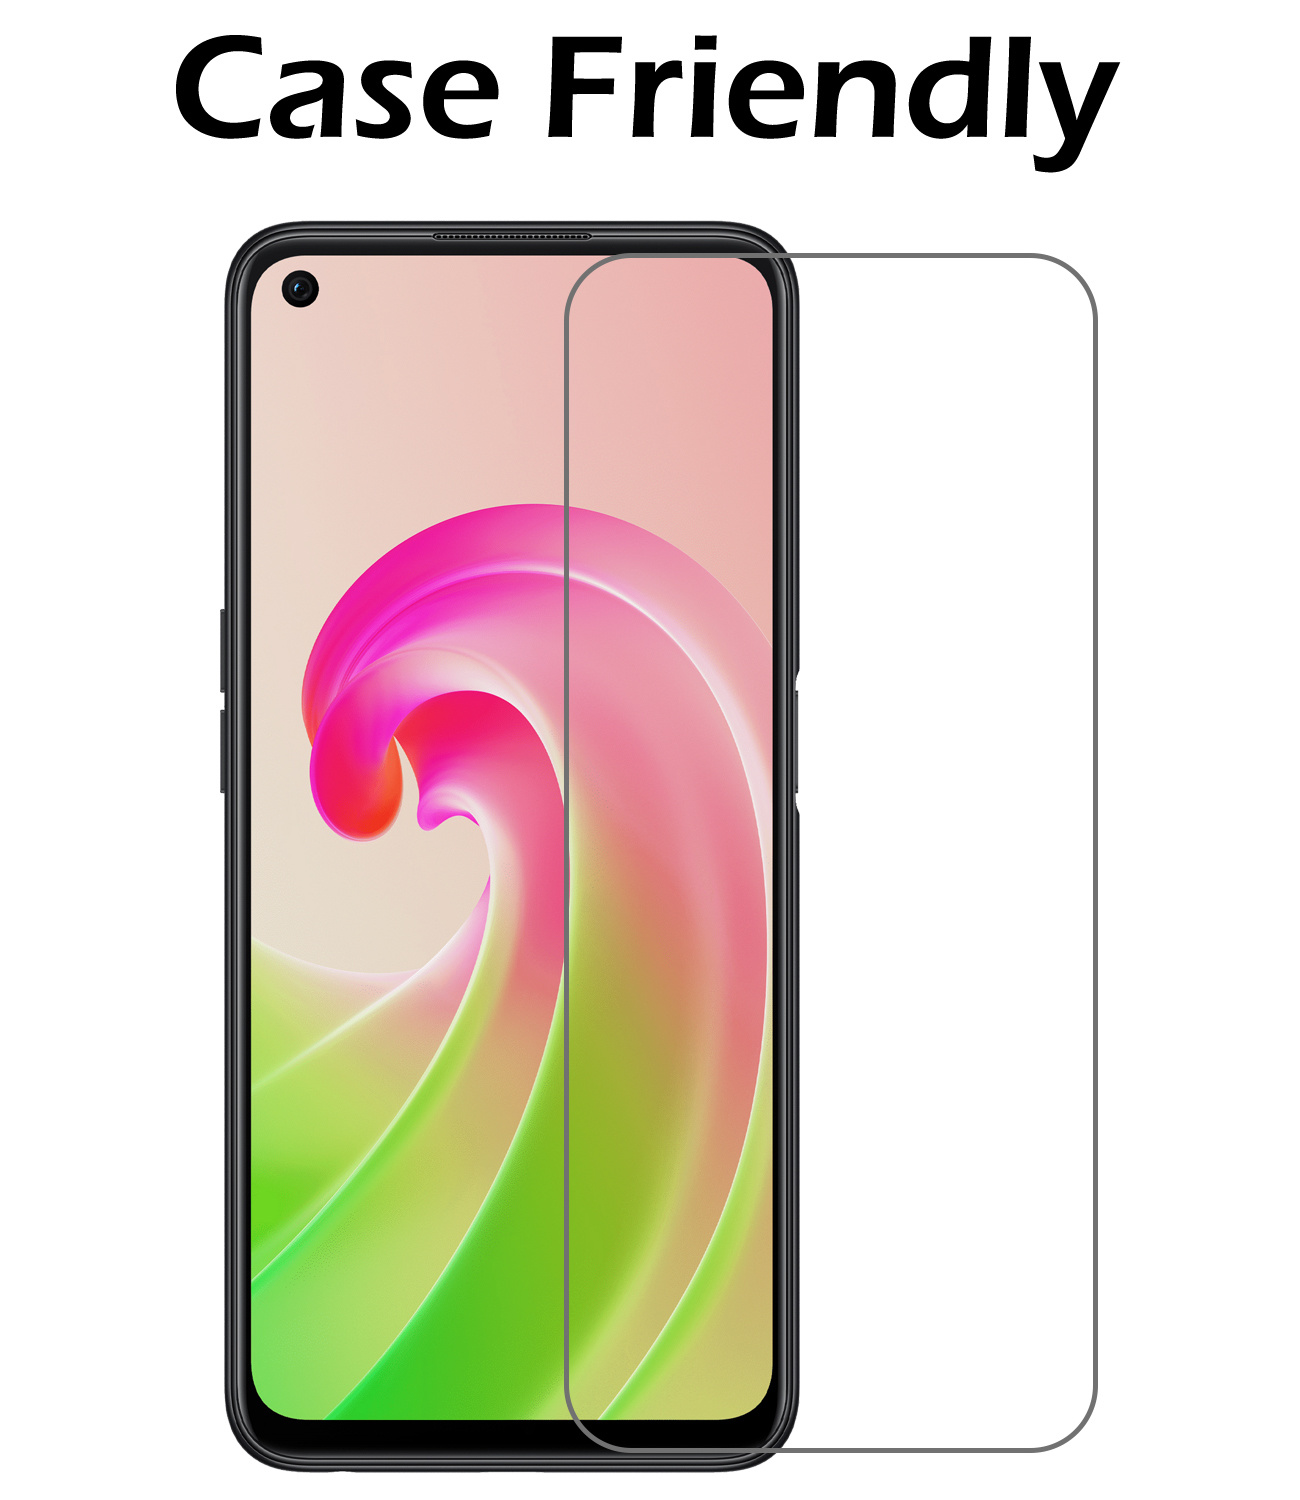 Nomfy OPPO A76 Hoesje Met Screenprotector - OPPO A76 Case Transparant Siliconen - OPPO A76 Hoes Met Screenprotector